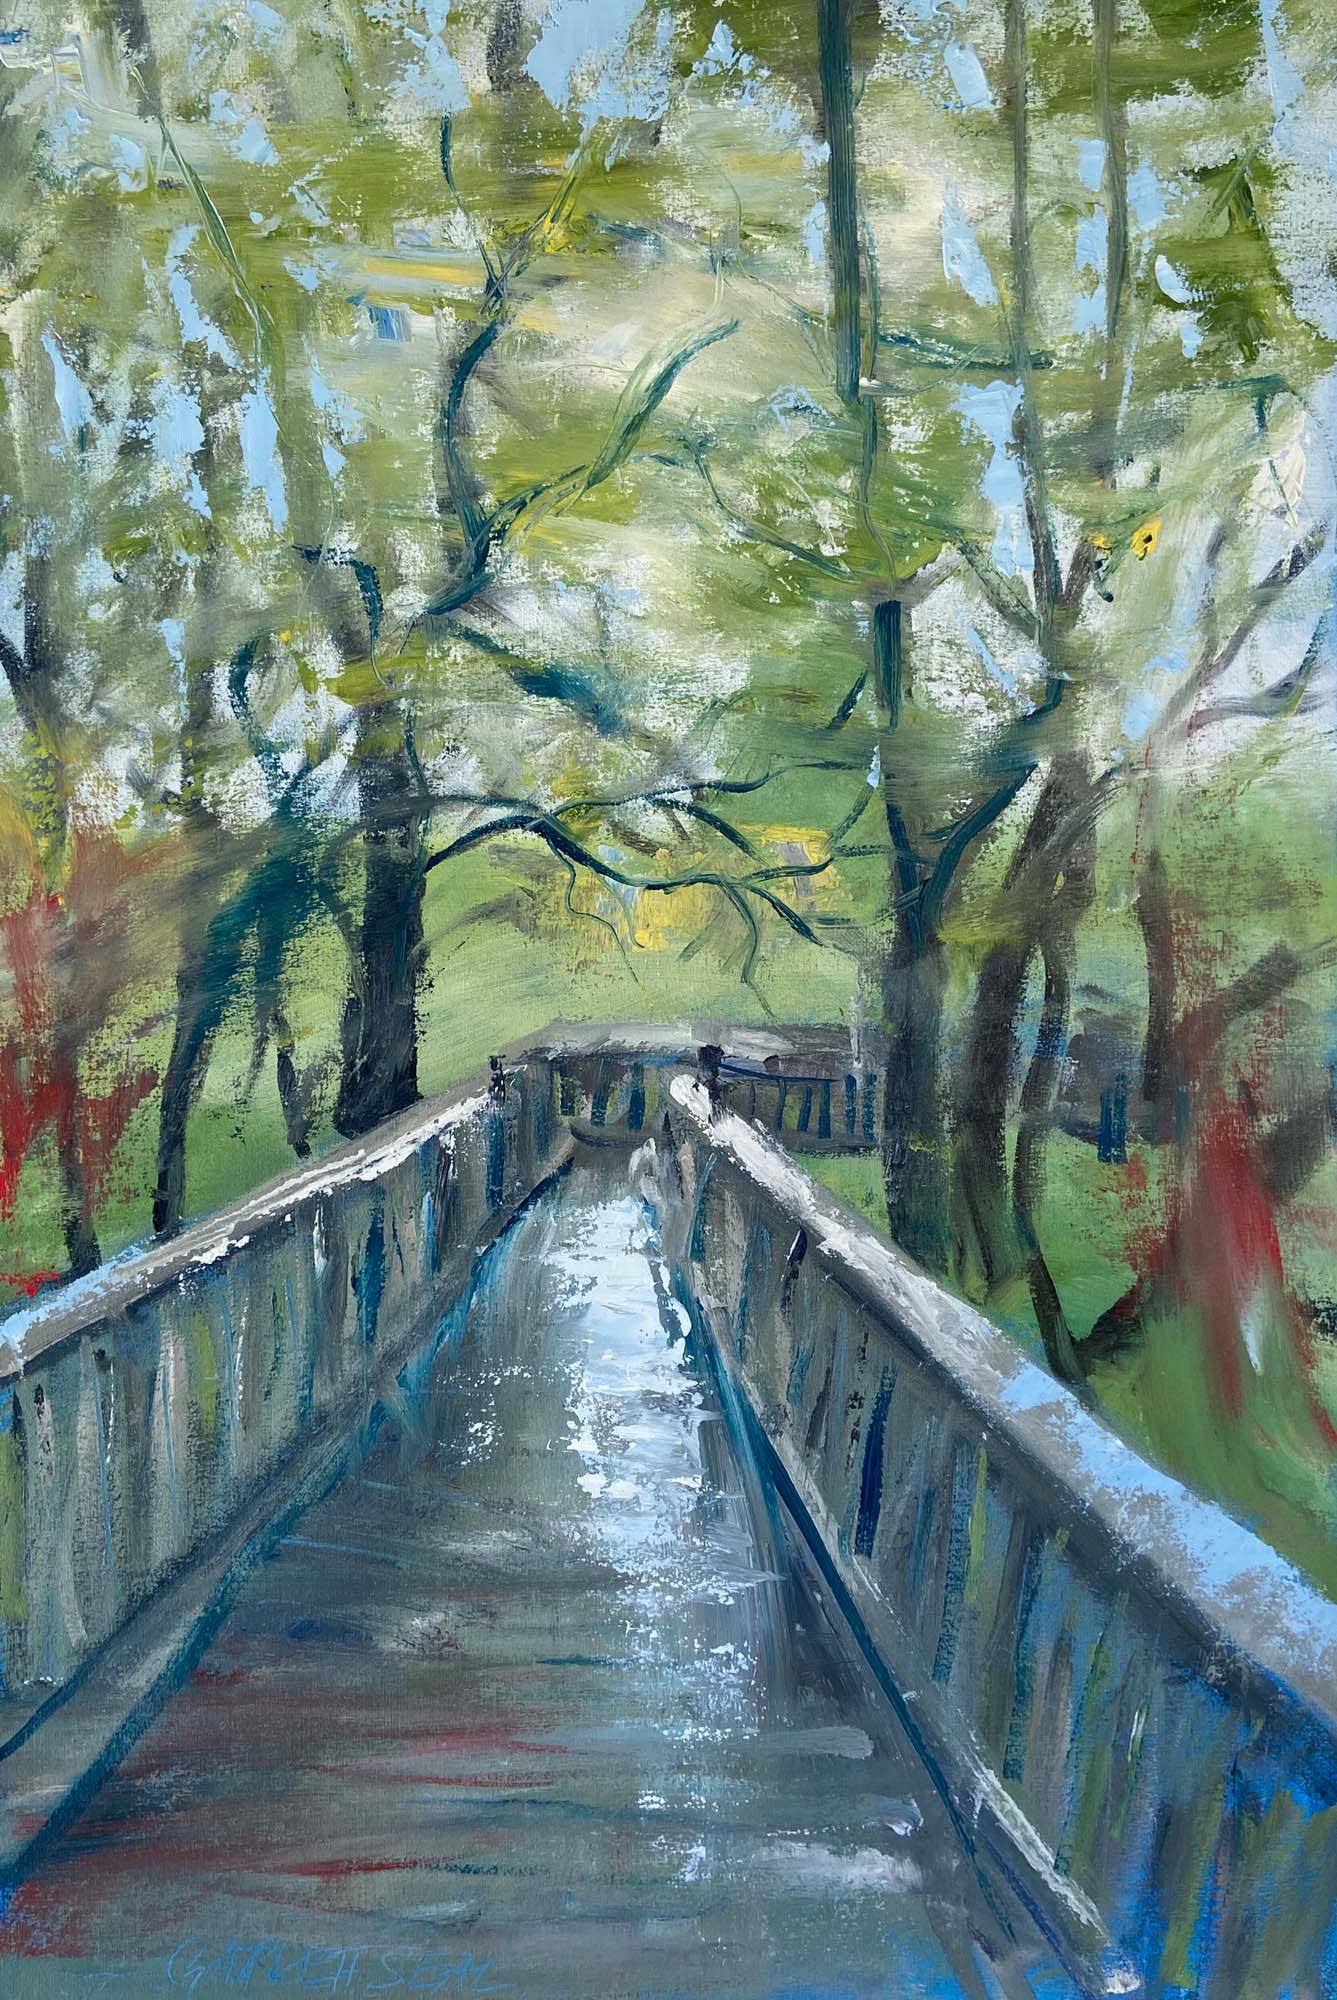 Scene of a wooden bridge, trees, expressive and energetic brushstrokes 